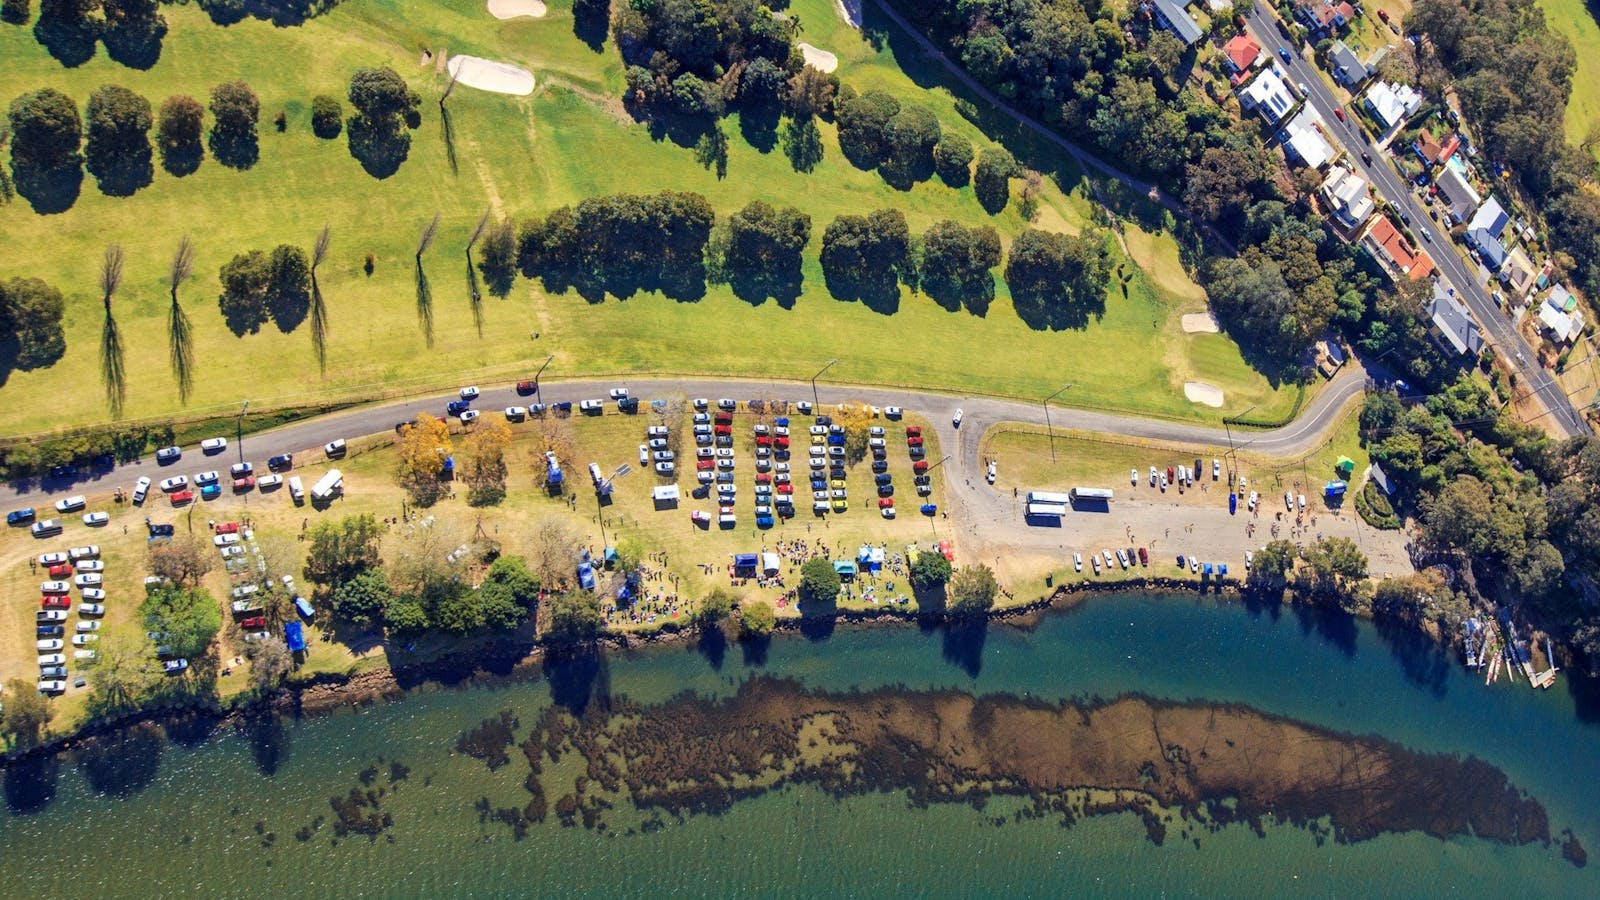 The Shoalhaven River Boat Ramp neighbors the golf course on the northern banks.